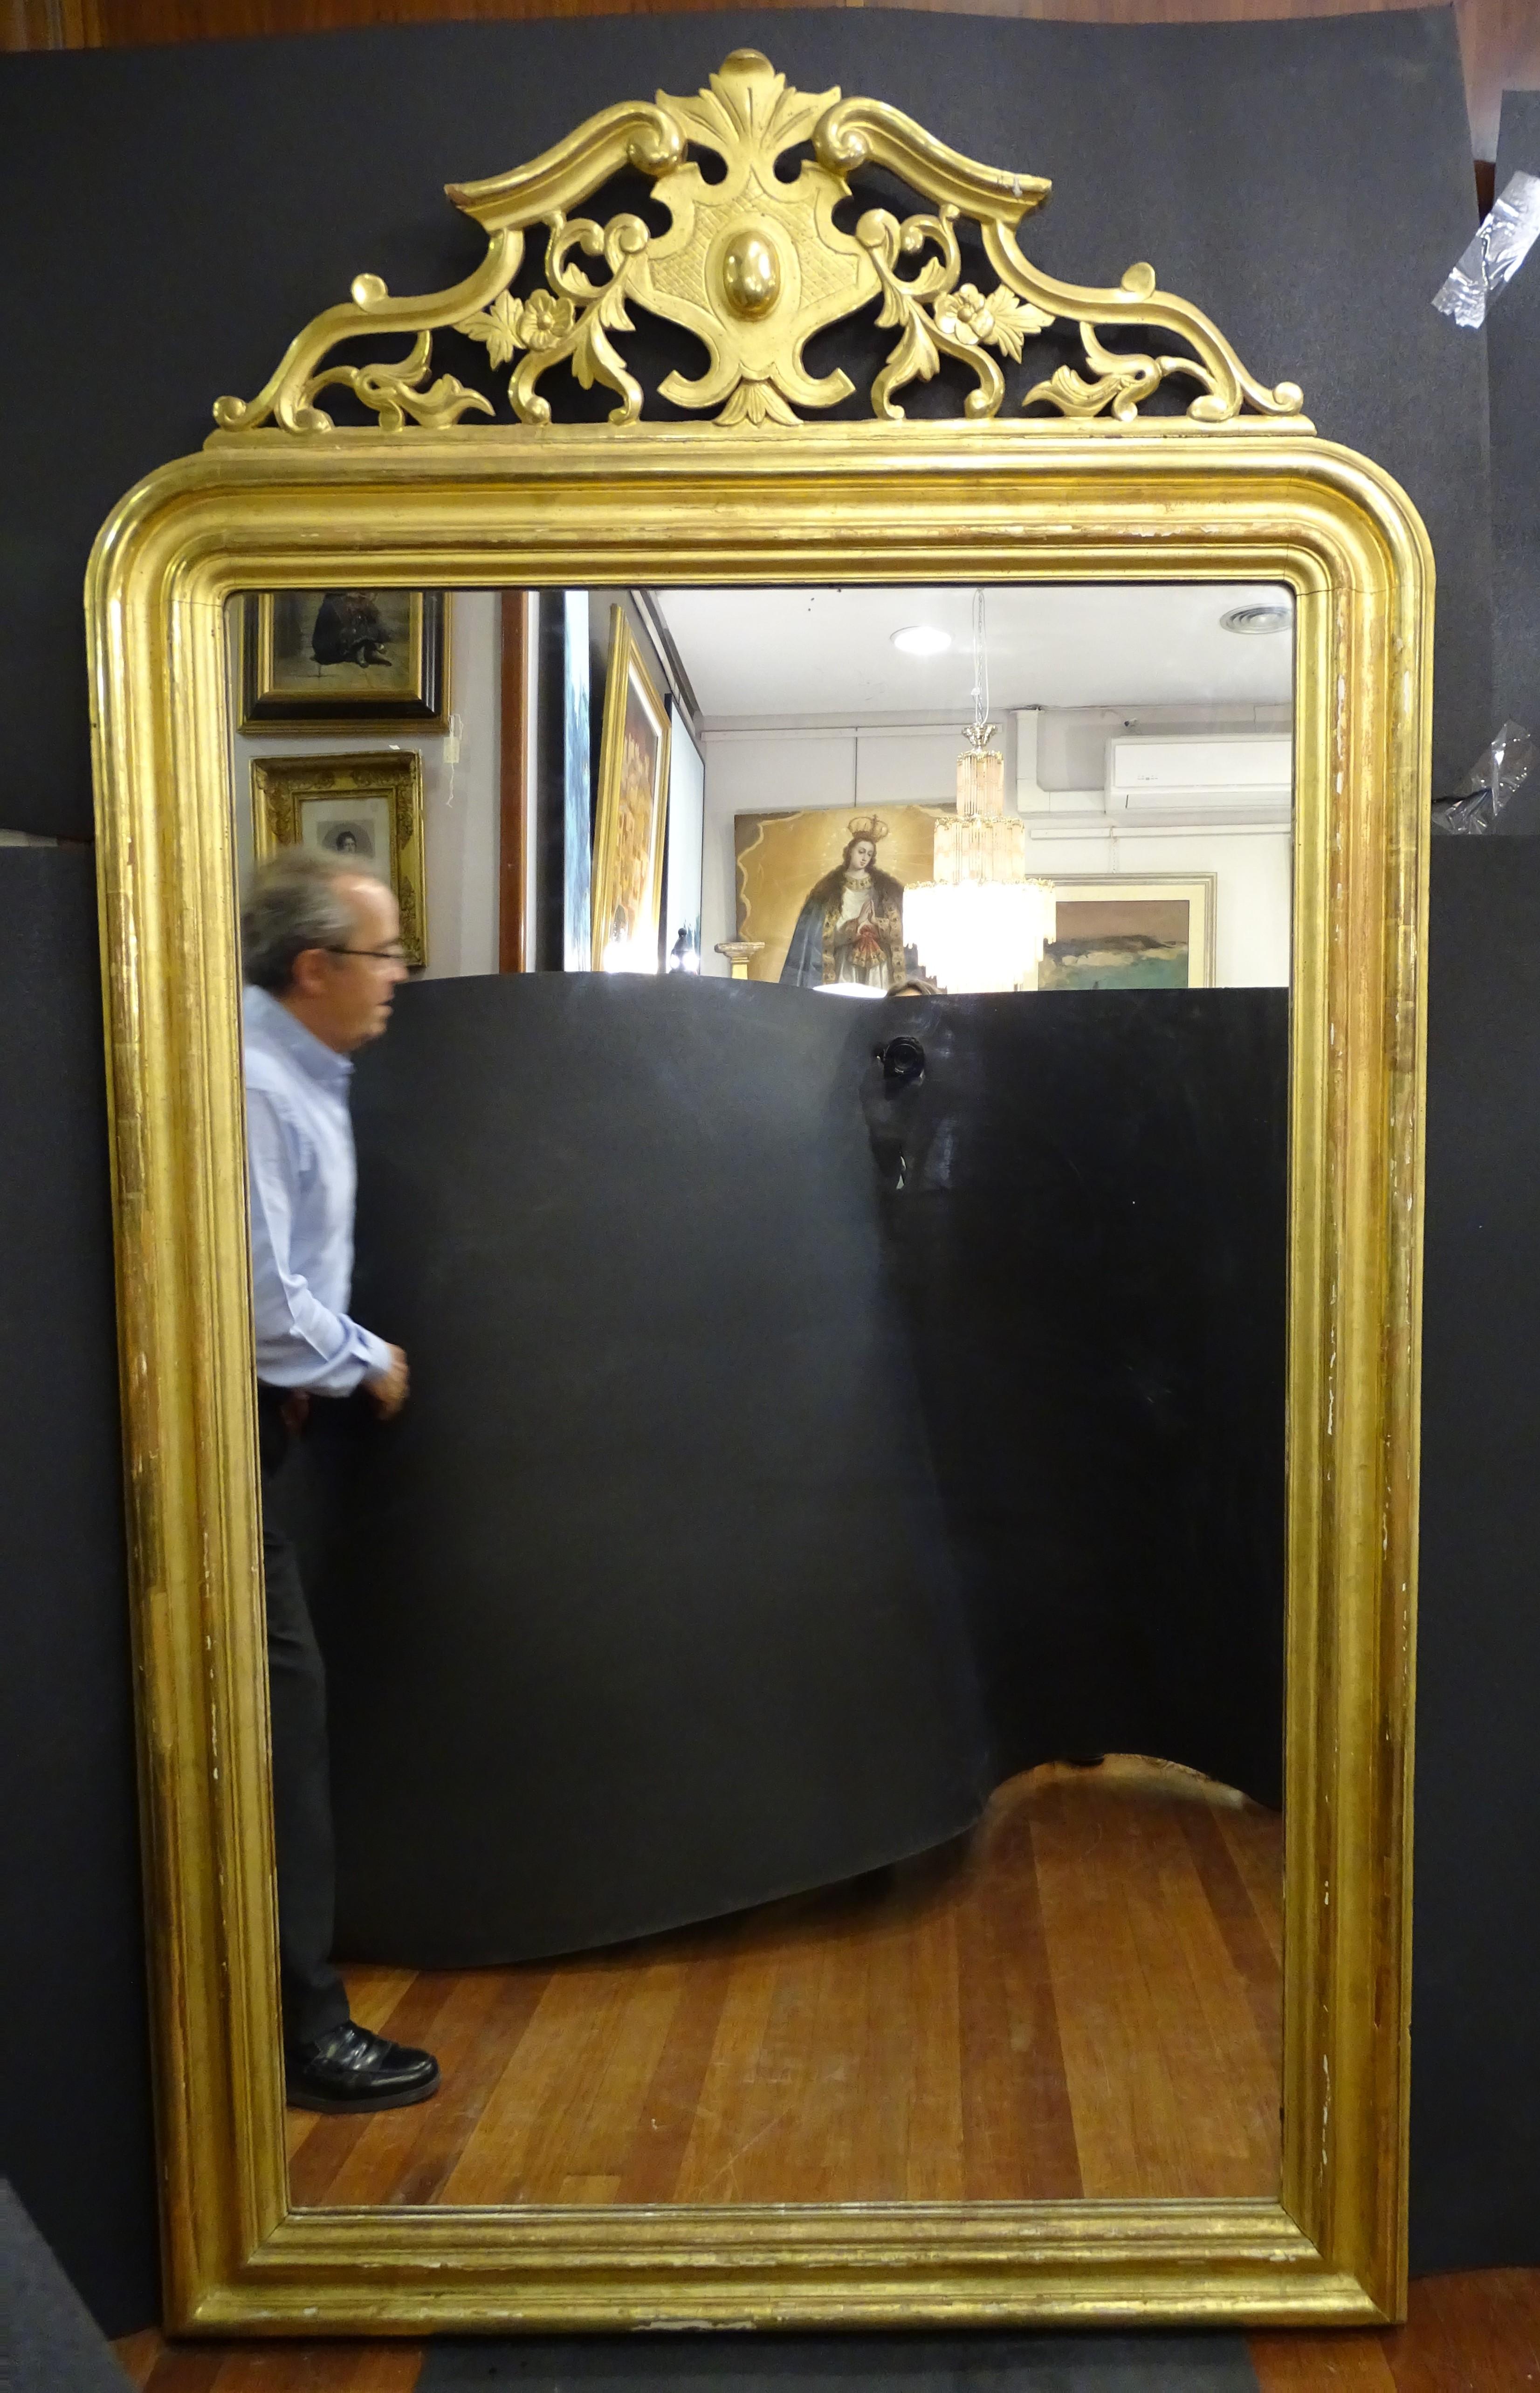 Napoleon III 19th Century French Mirror Trumeaumirror, Gild and Carved Wood